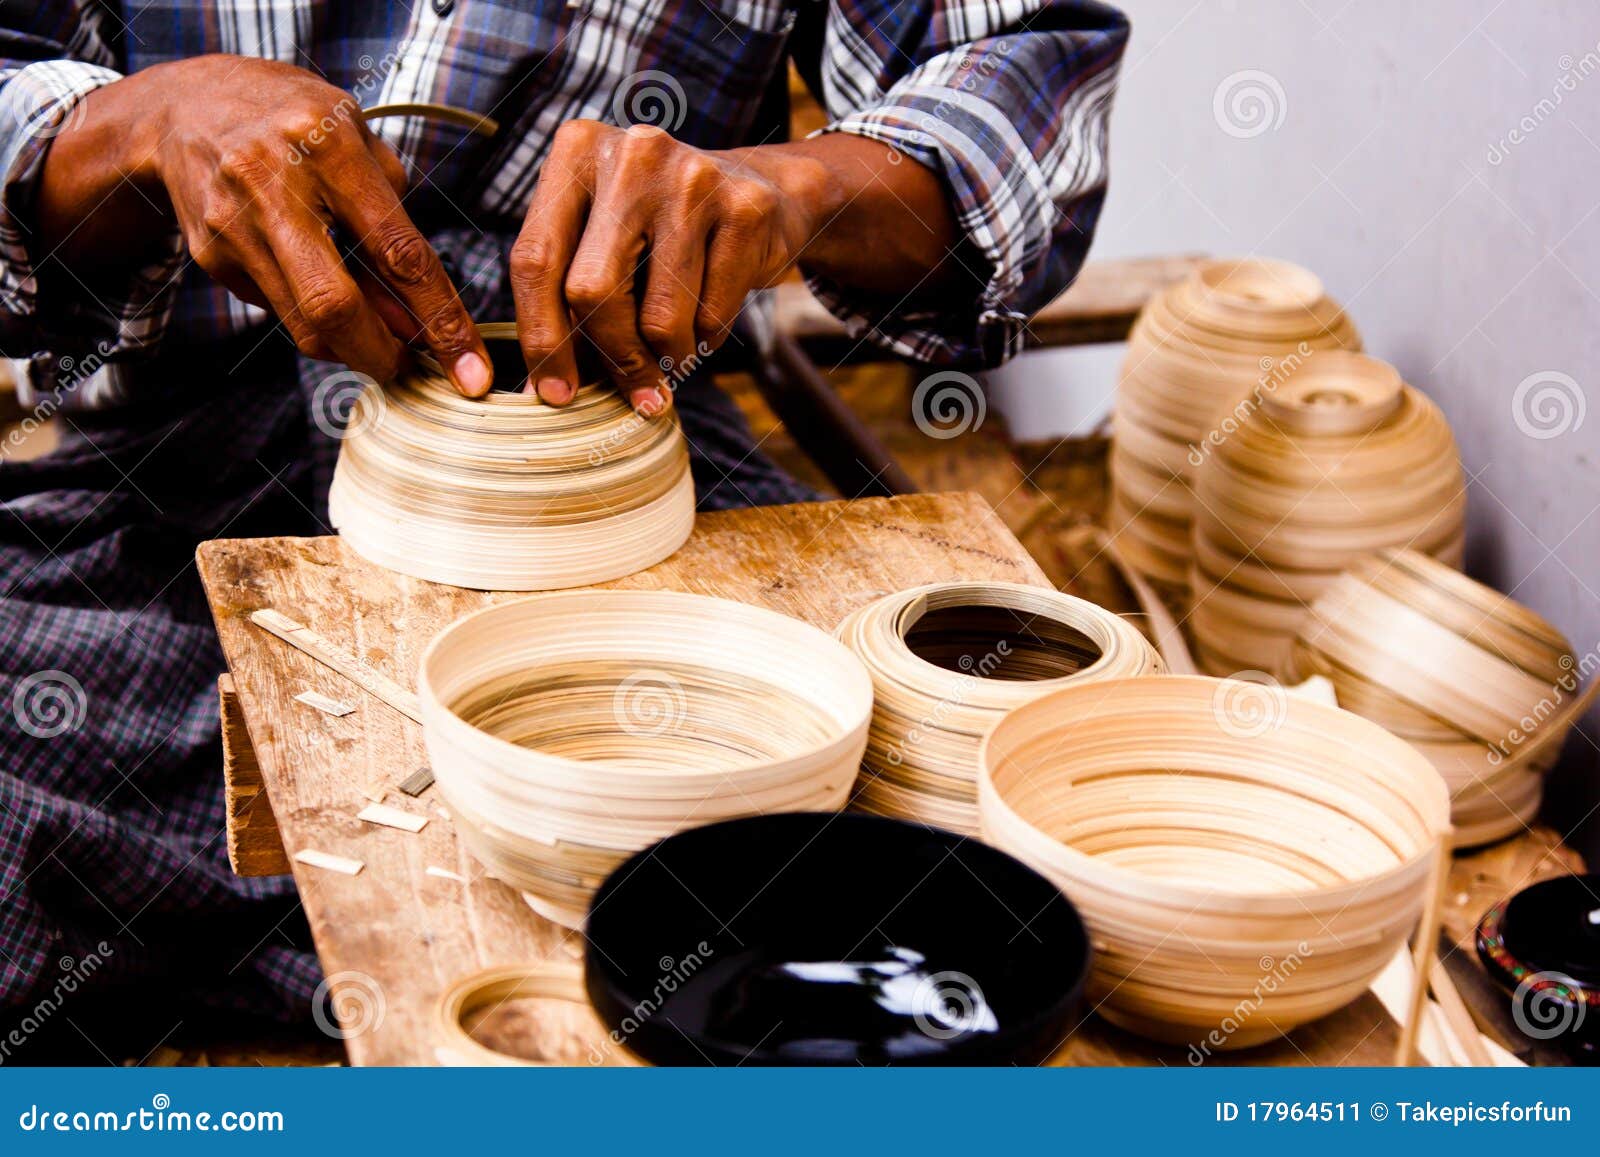 lacquer ware in myanmar